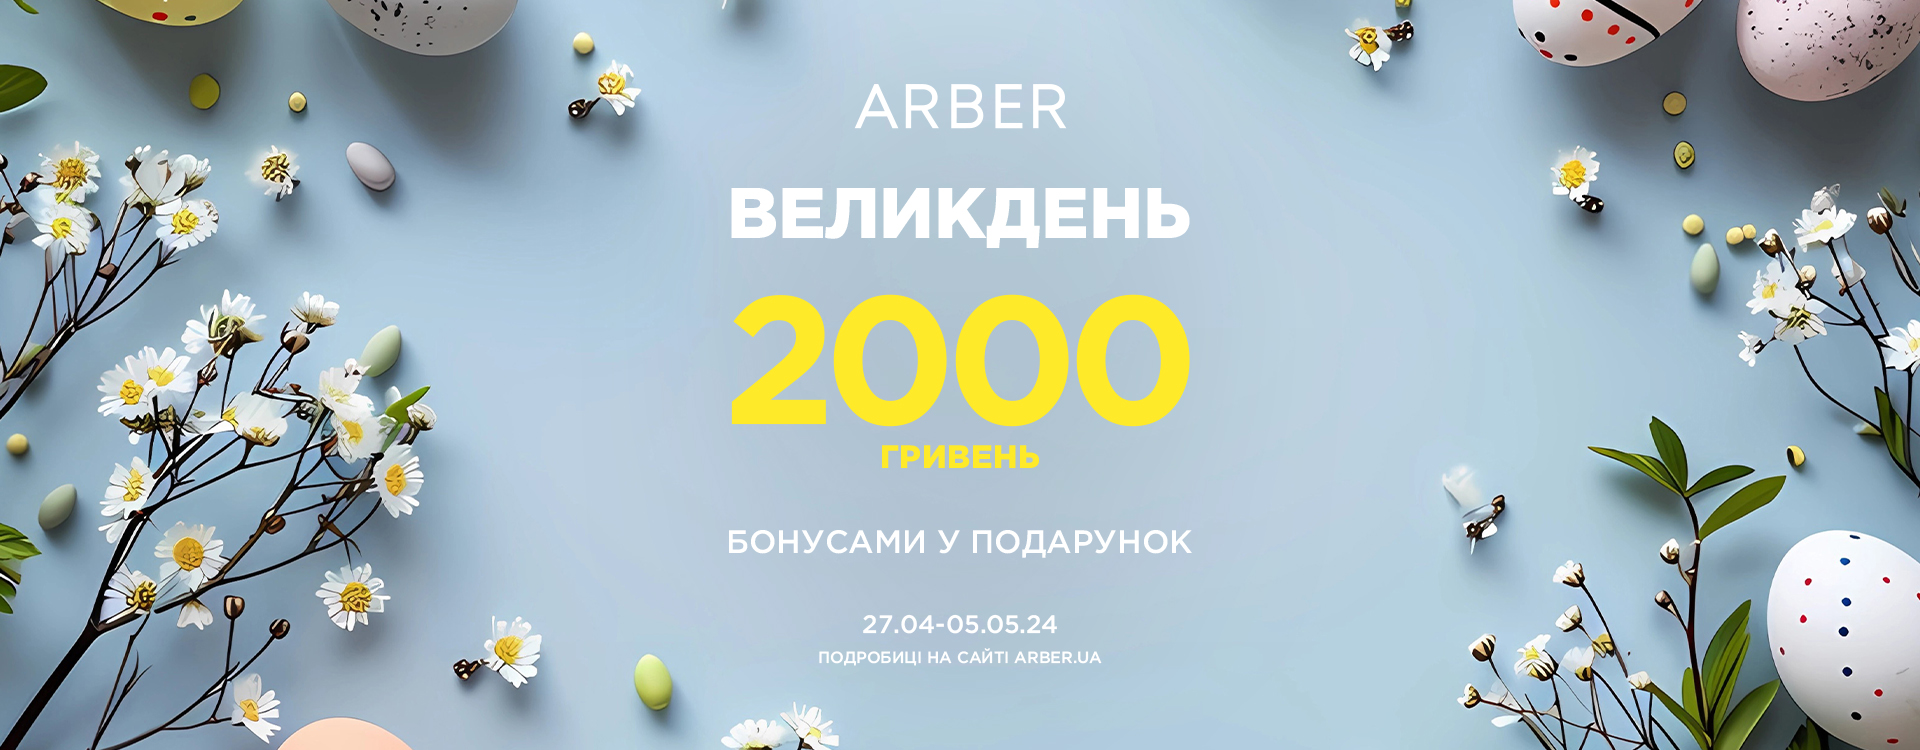 Celebrate Easter with ARBER